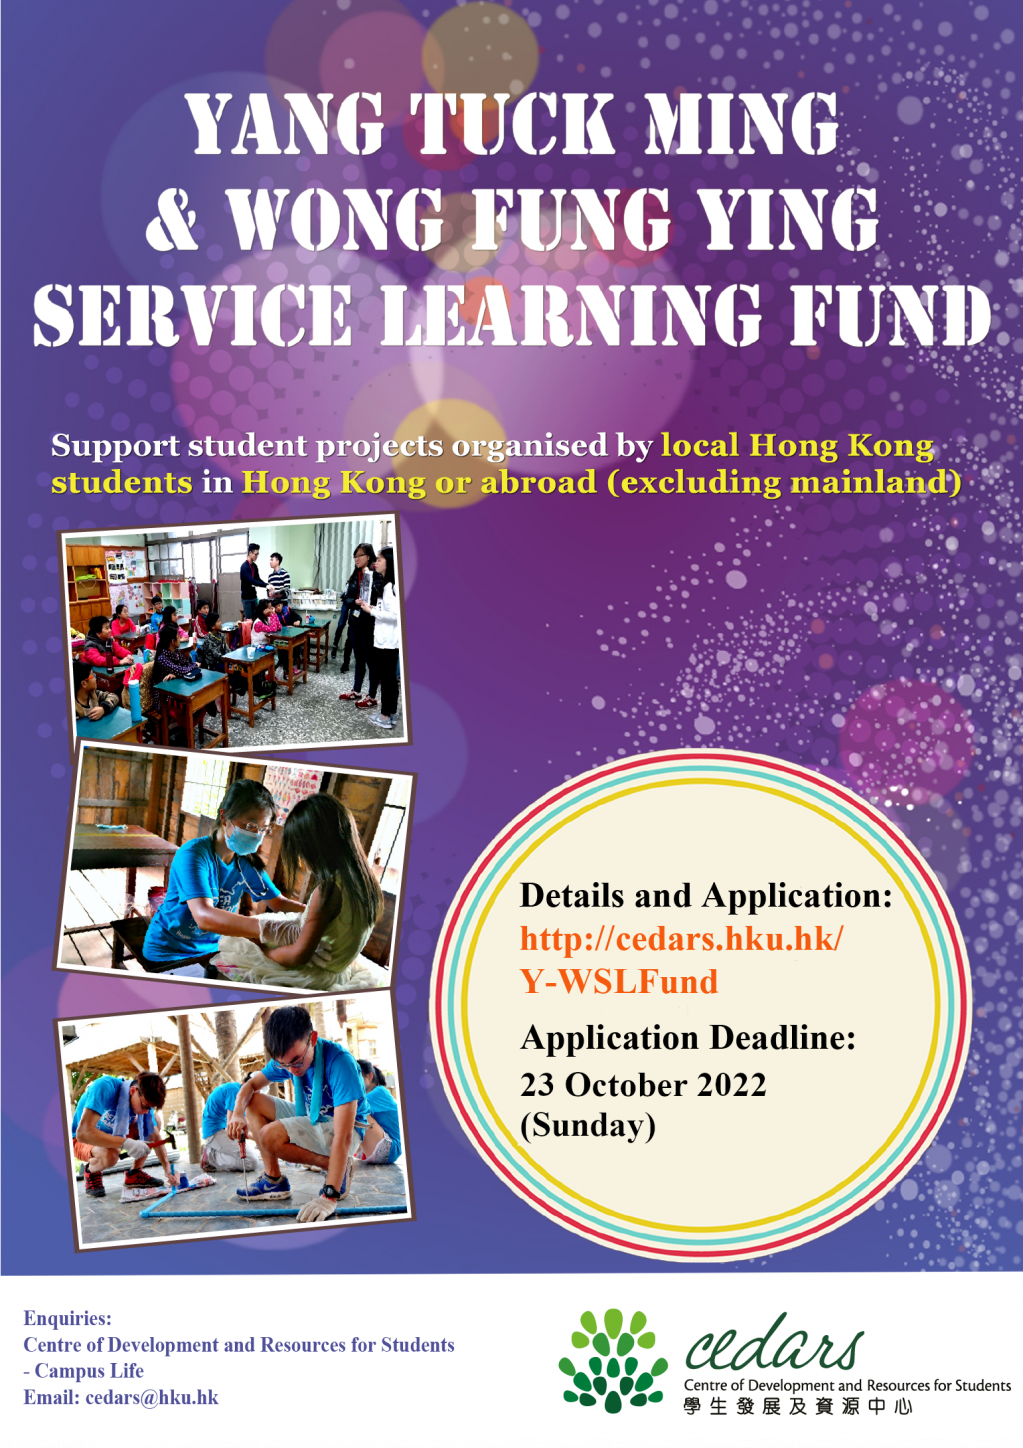 Yang Tuck Ming and Wong Fung Ying Service Learning Fund opens for application now!